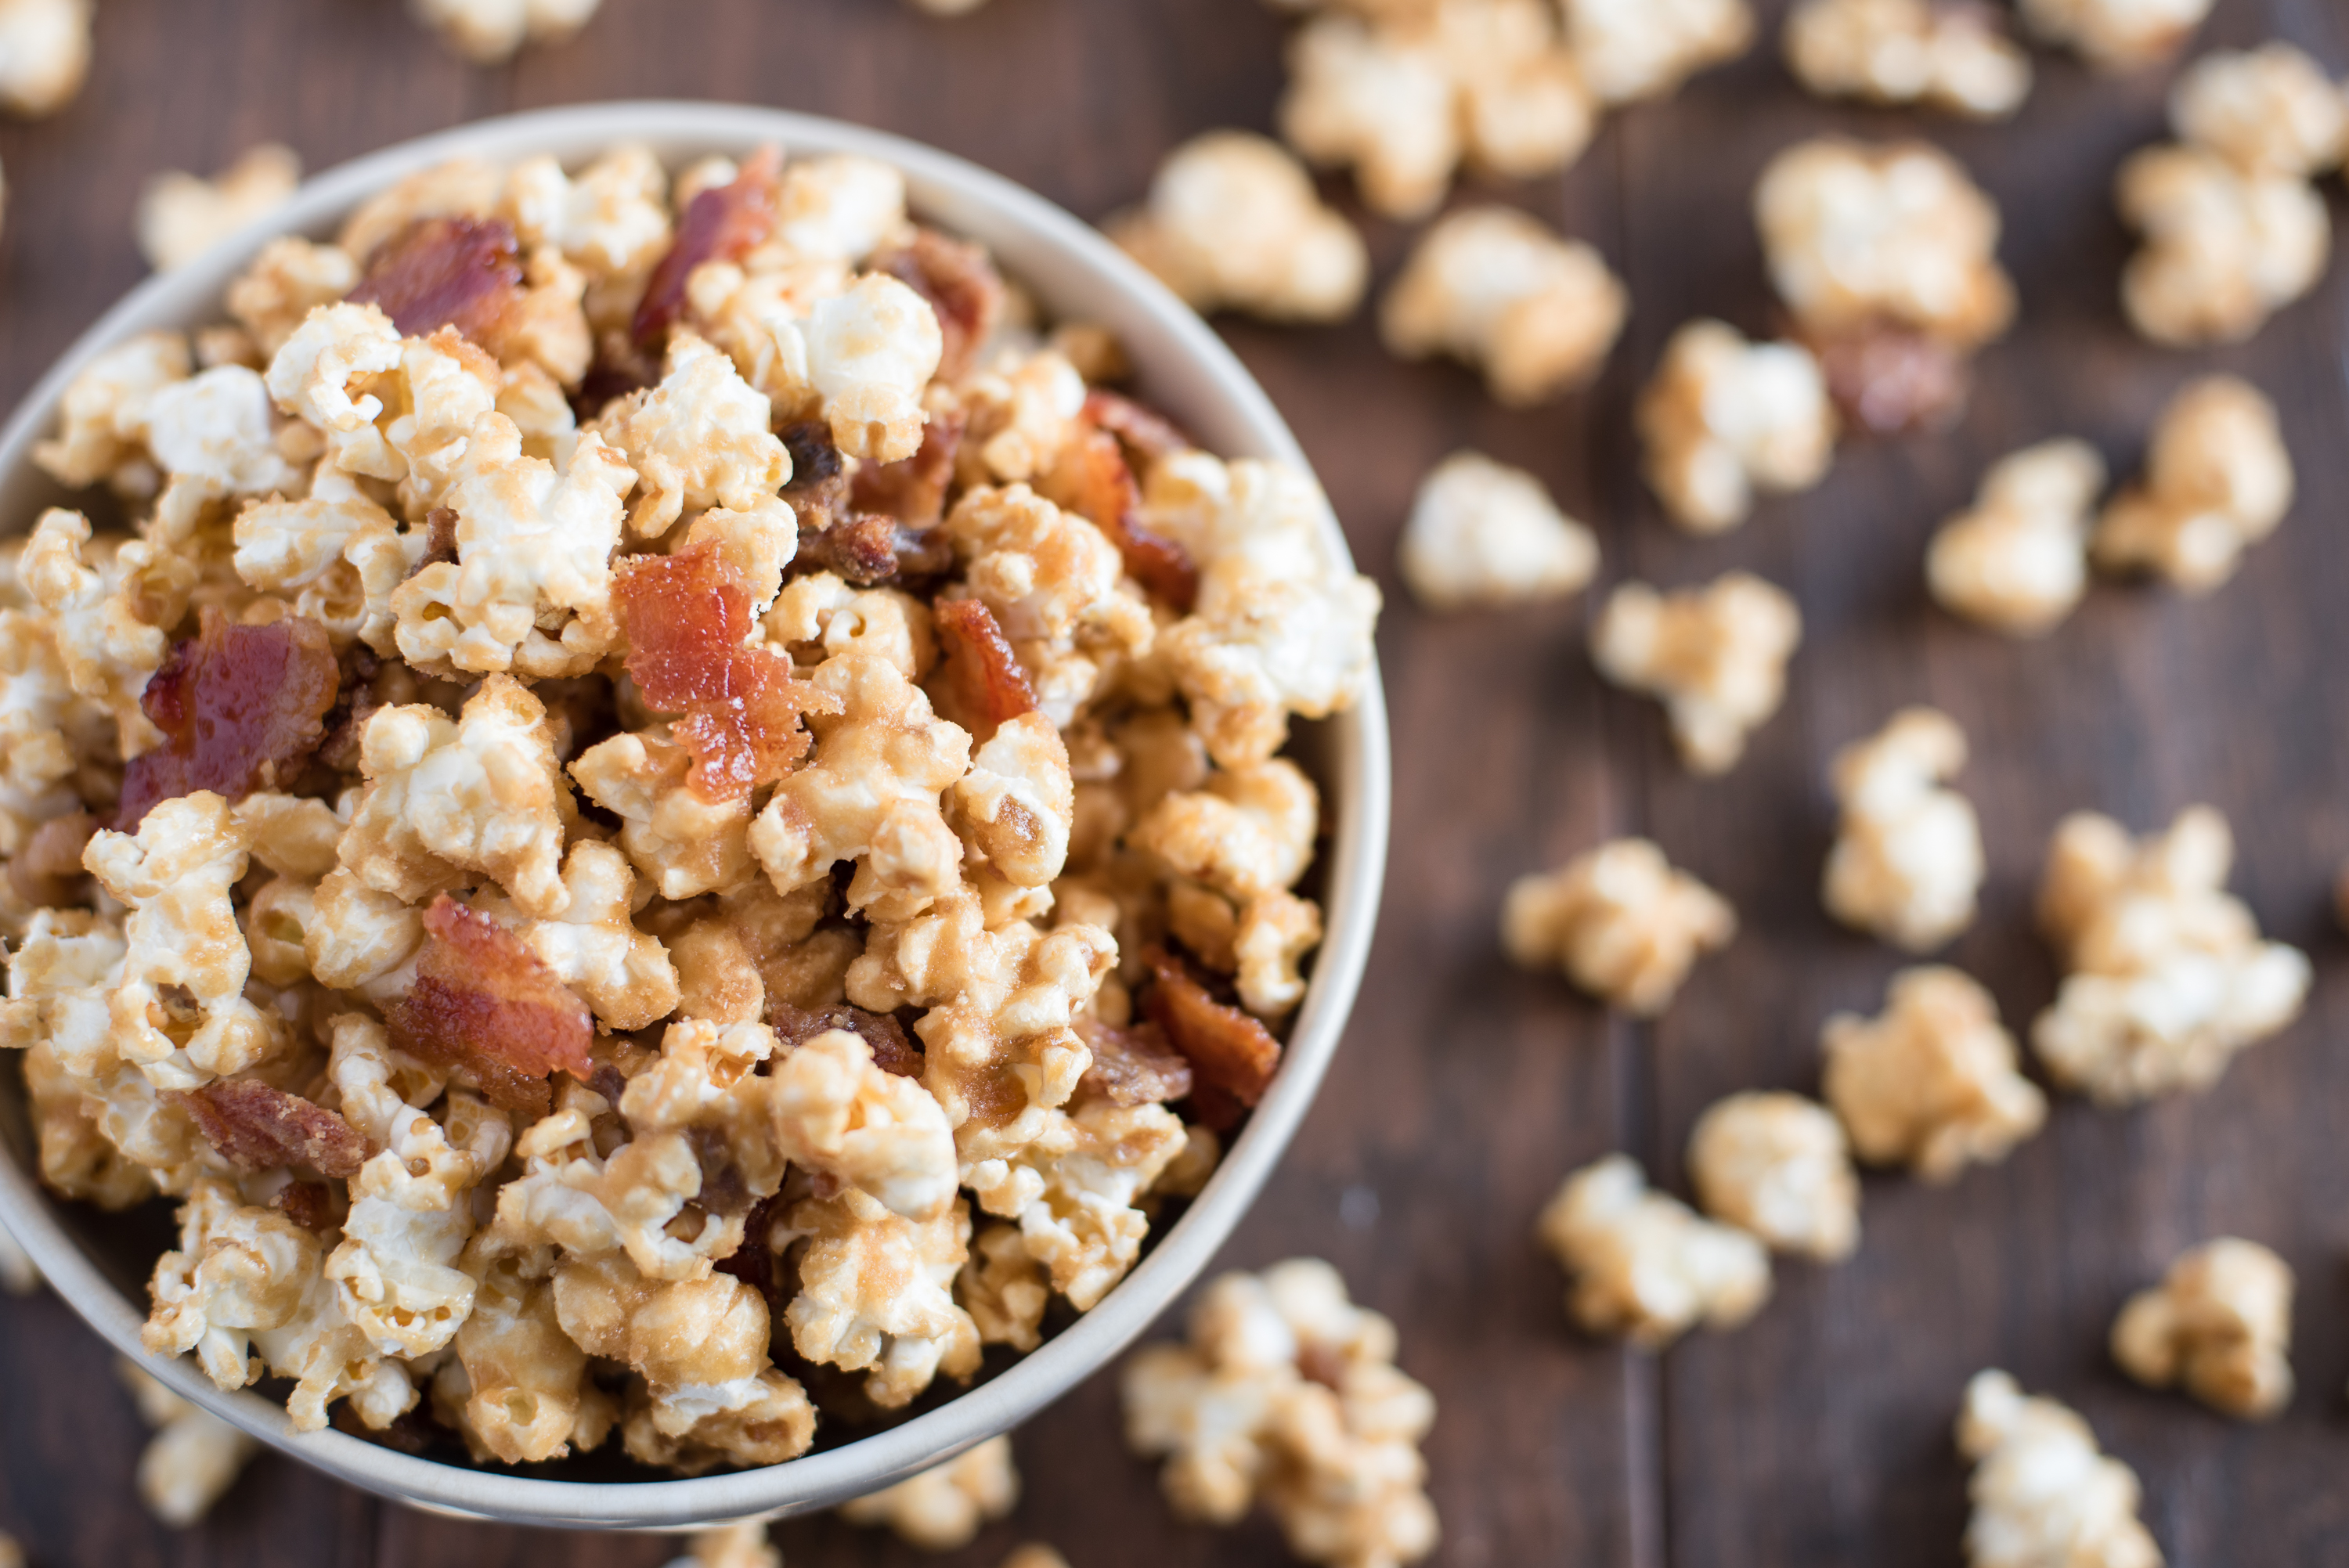 Popcorn with Canadian Maple Syrup & Bacon … Good Morning!!